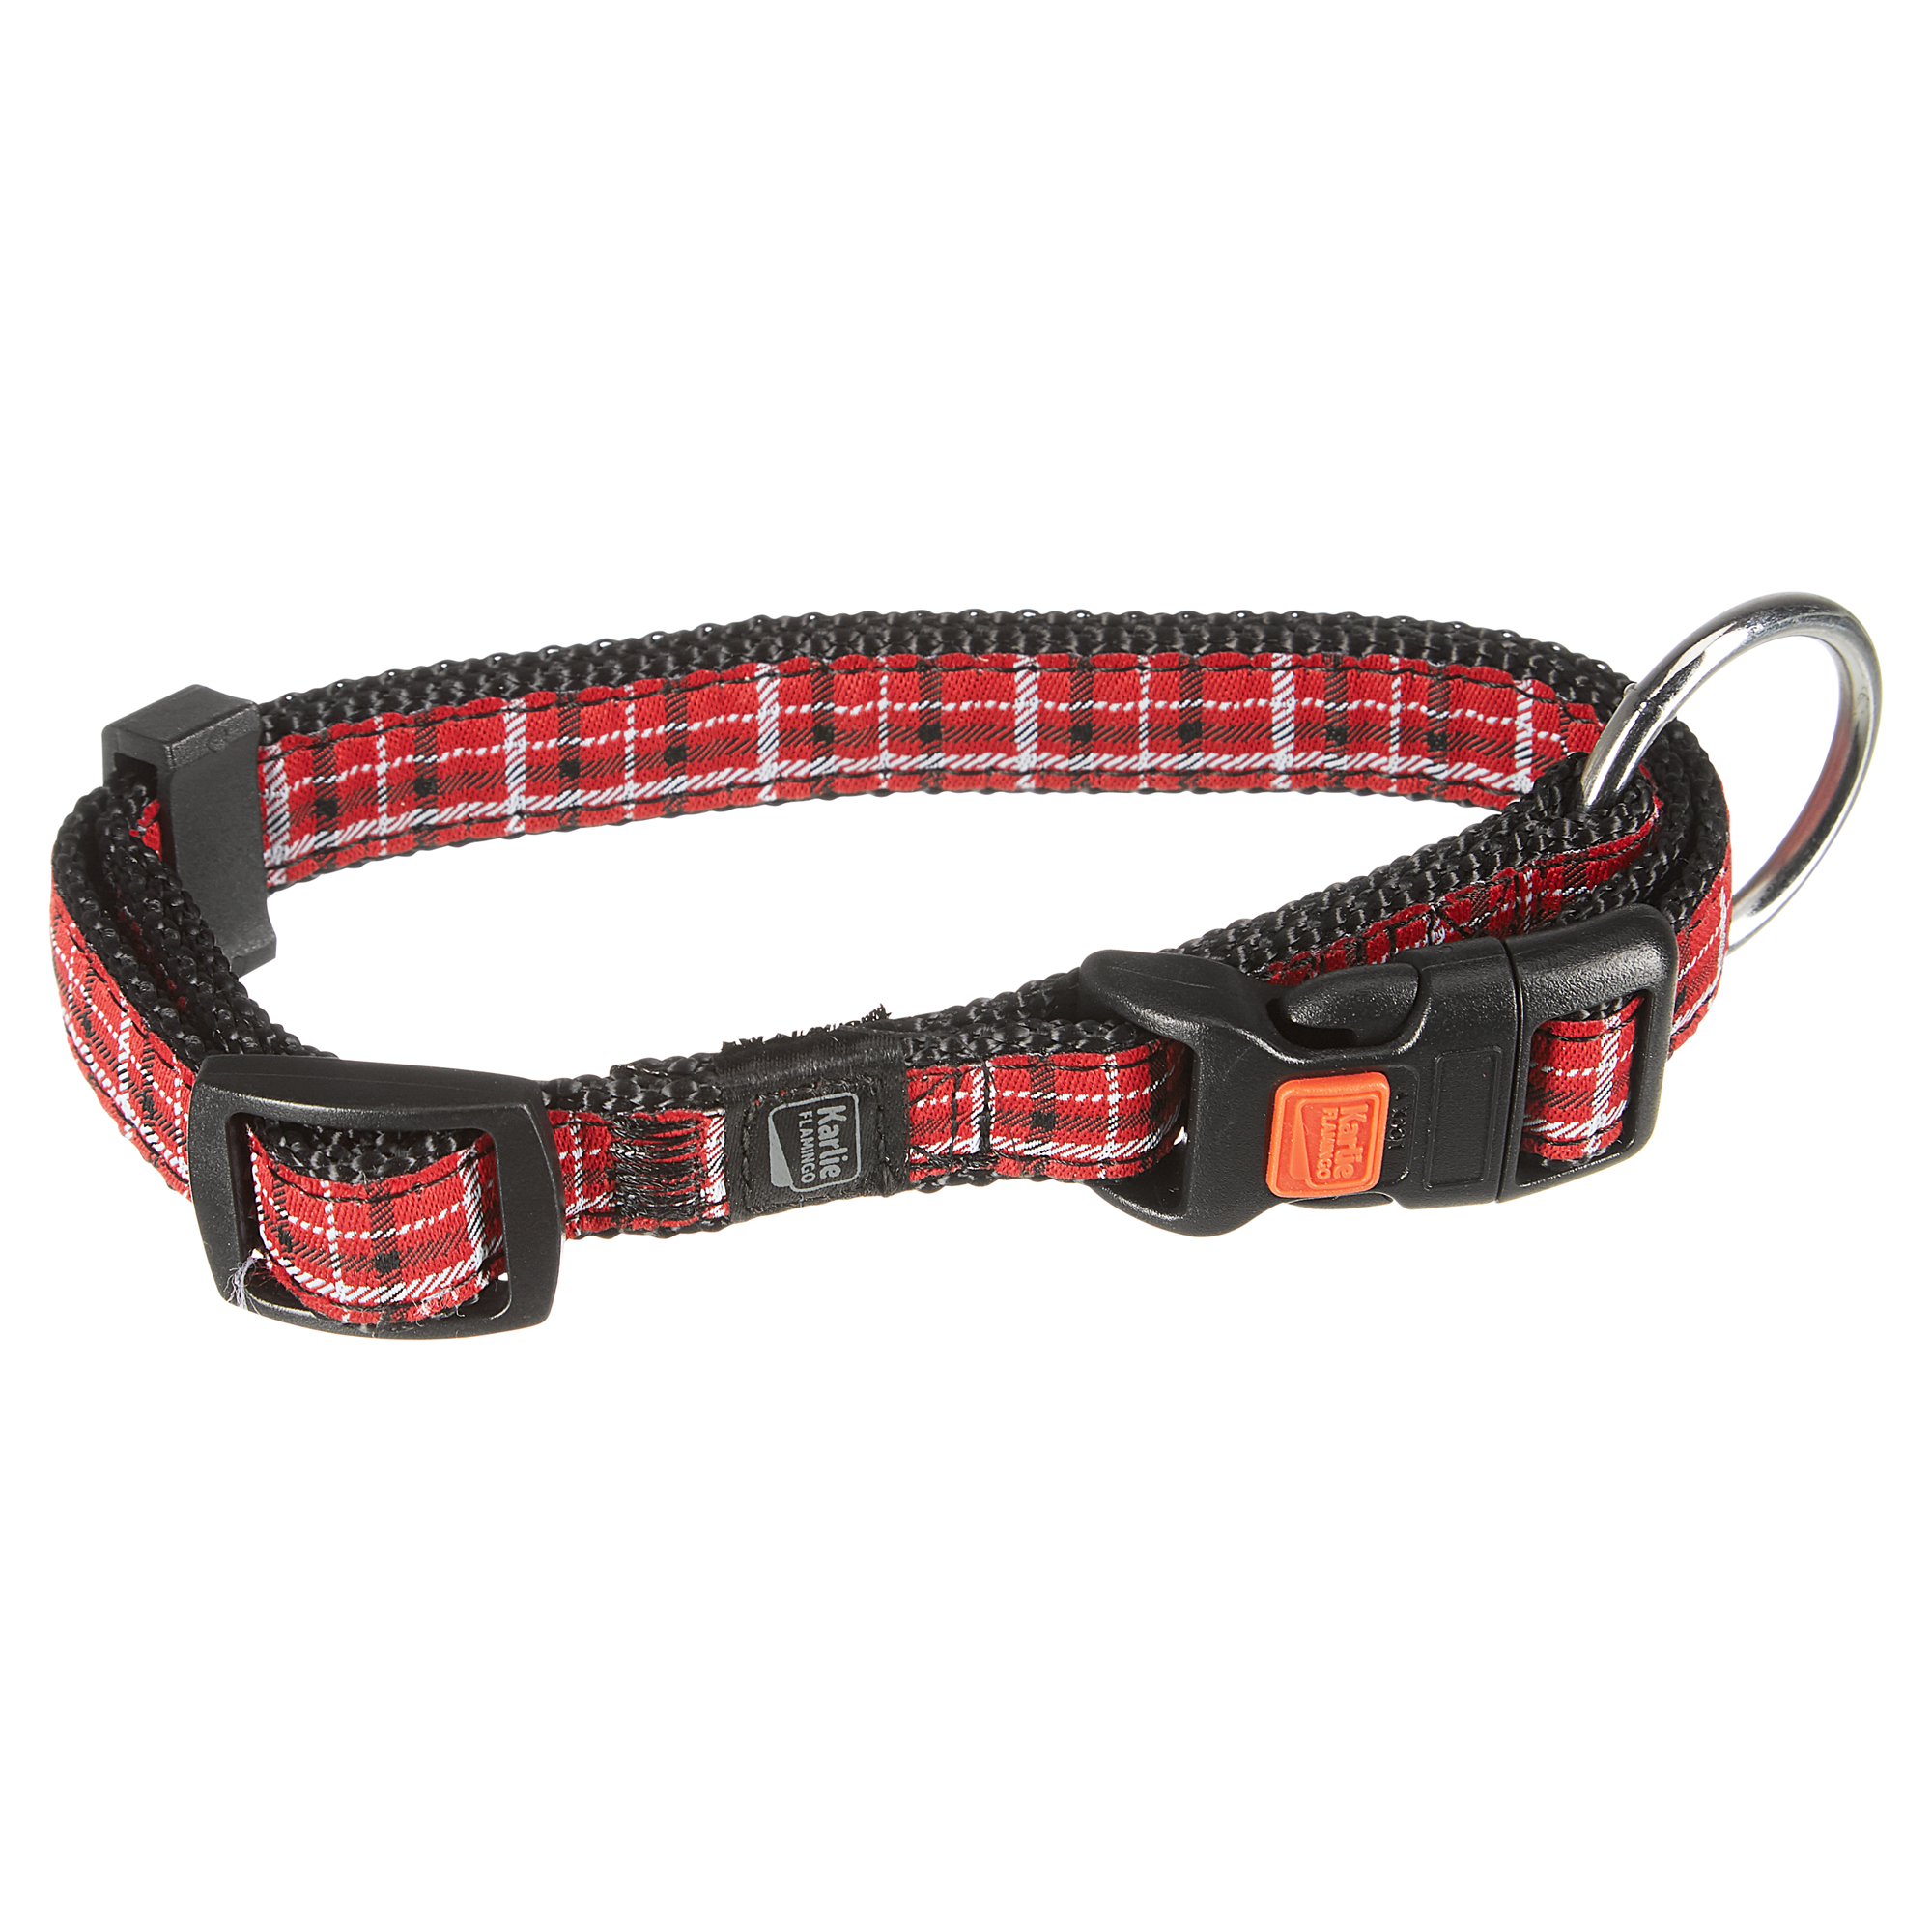 Hundehalsband "Tartan" 30 - 45 x 1,5 cm Gr. S + product picture